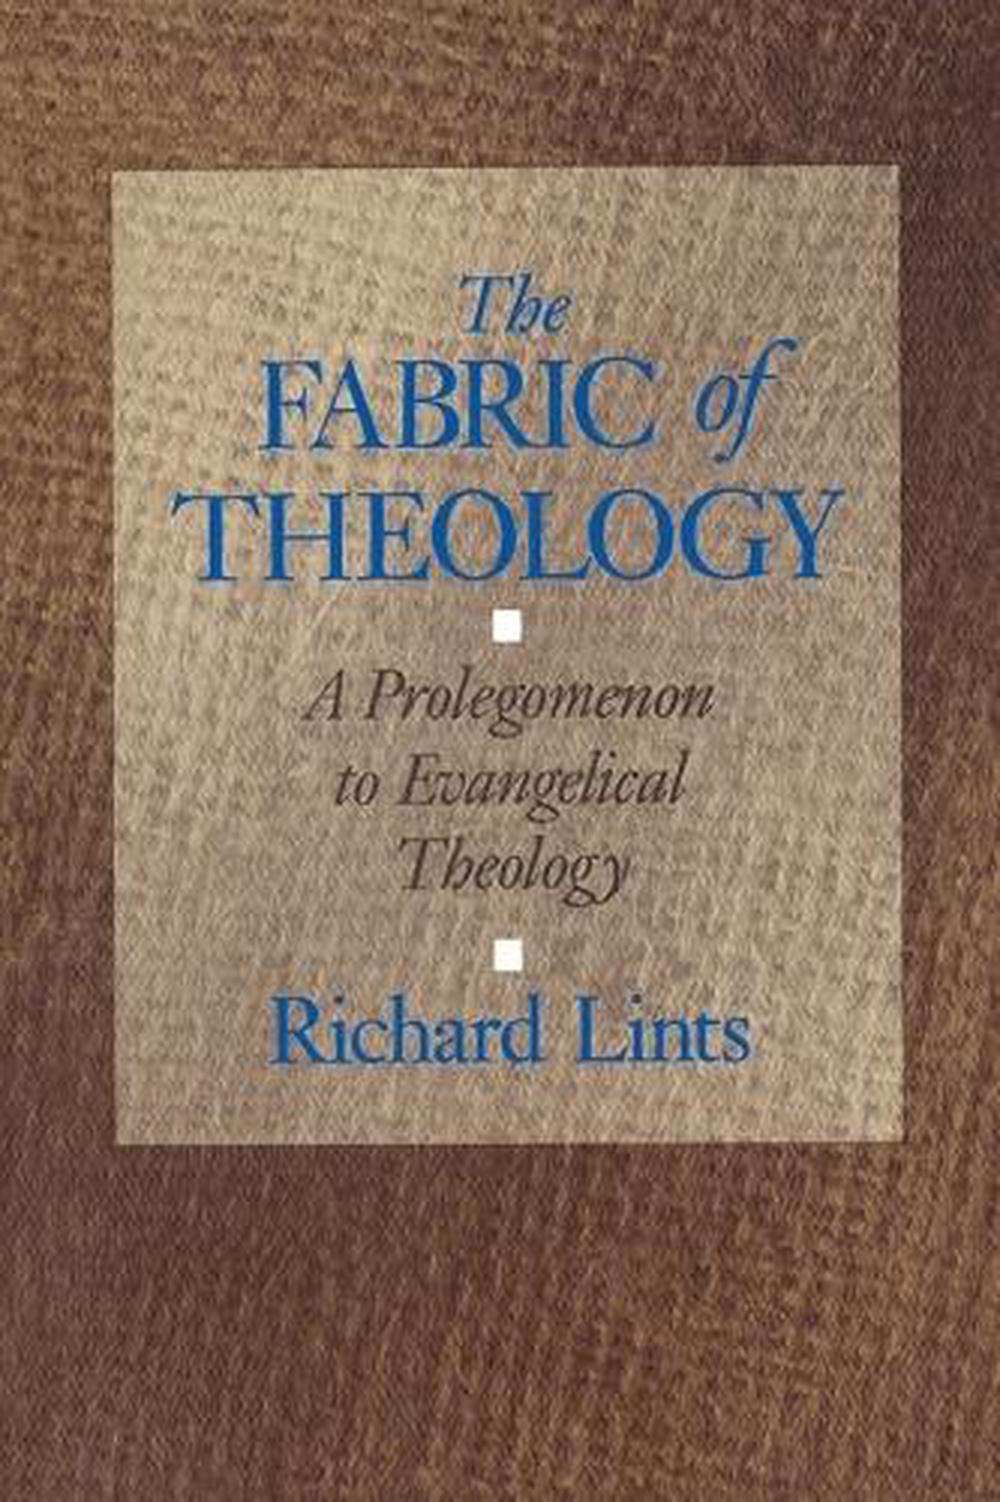 The Fabric of Theology A Prolegomenon to Evangelical Theology by